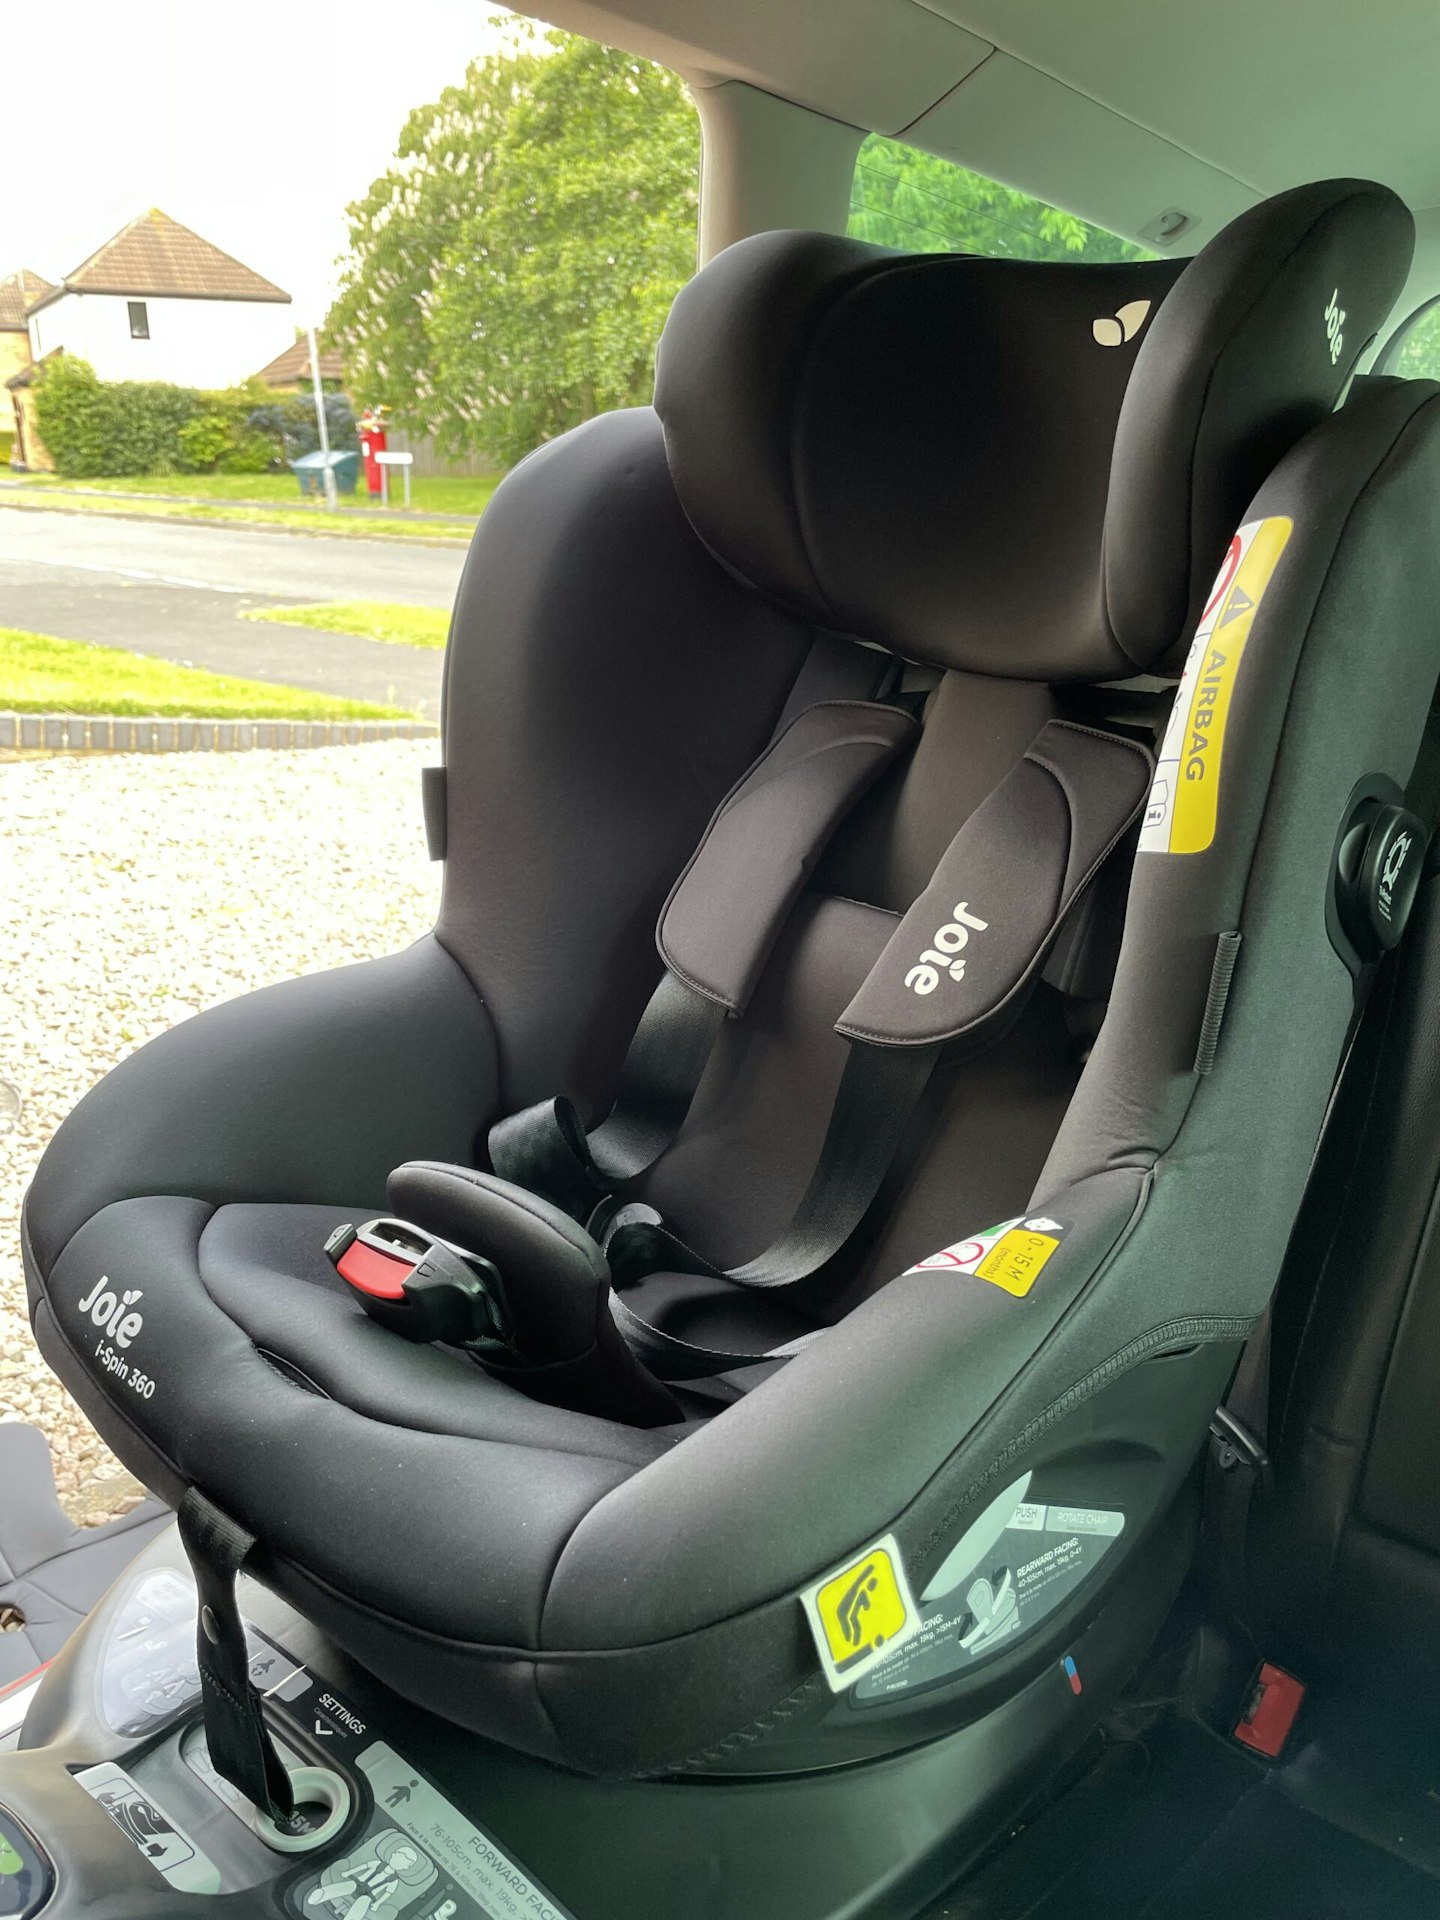 Joie i-Spin 360 car seat